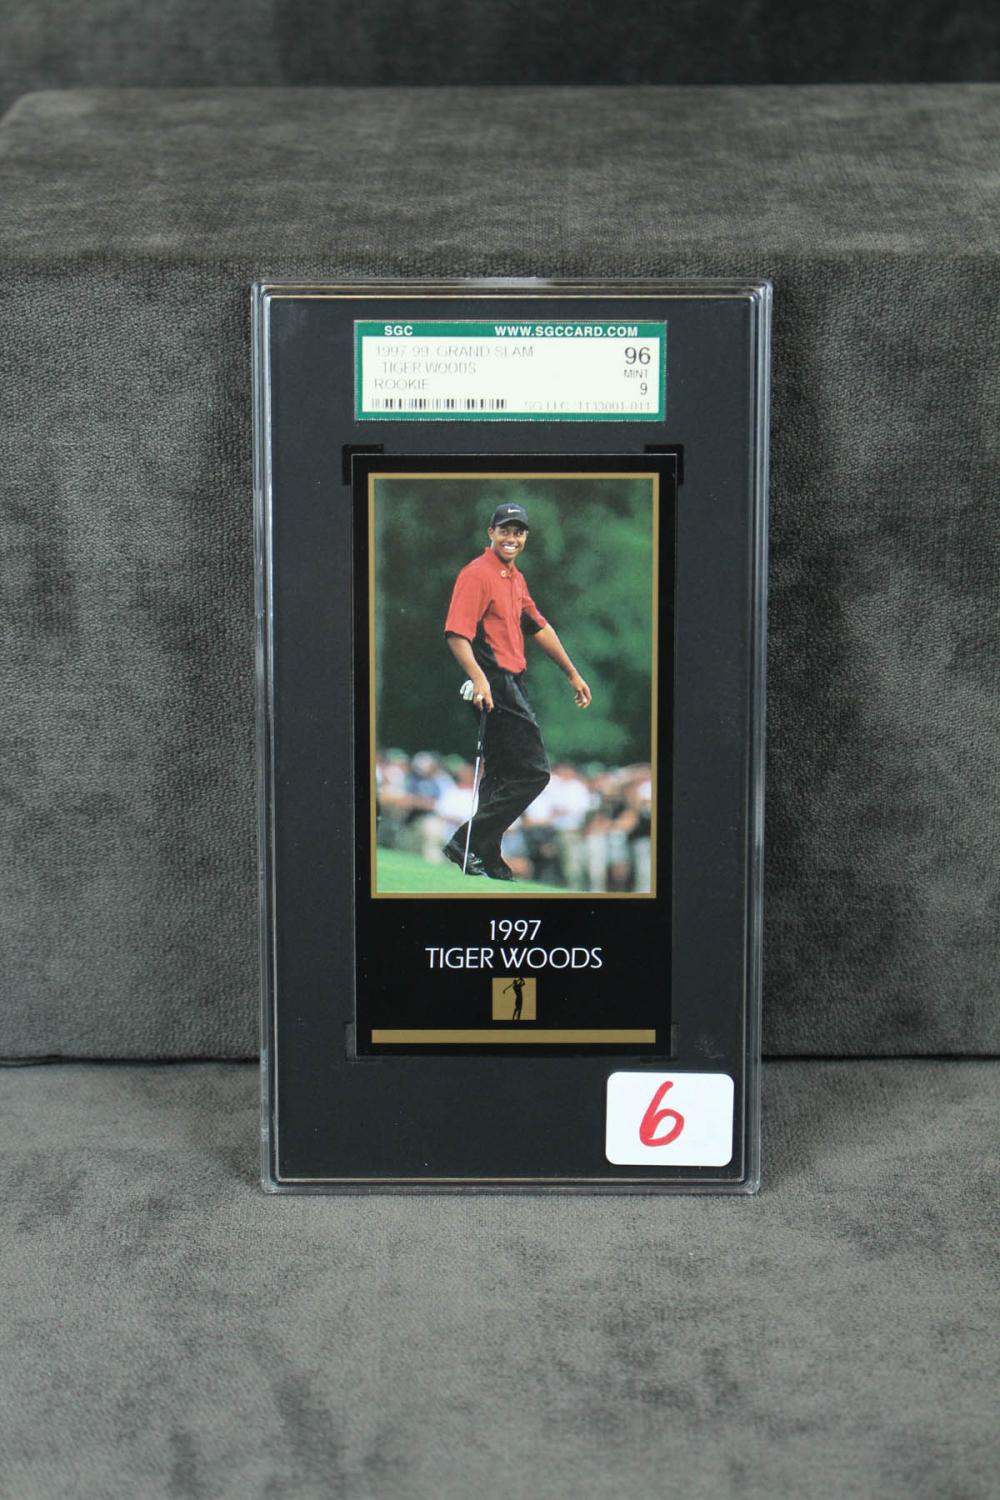 1997 TIGER WOODS ROOKIE CARD1997